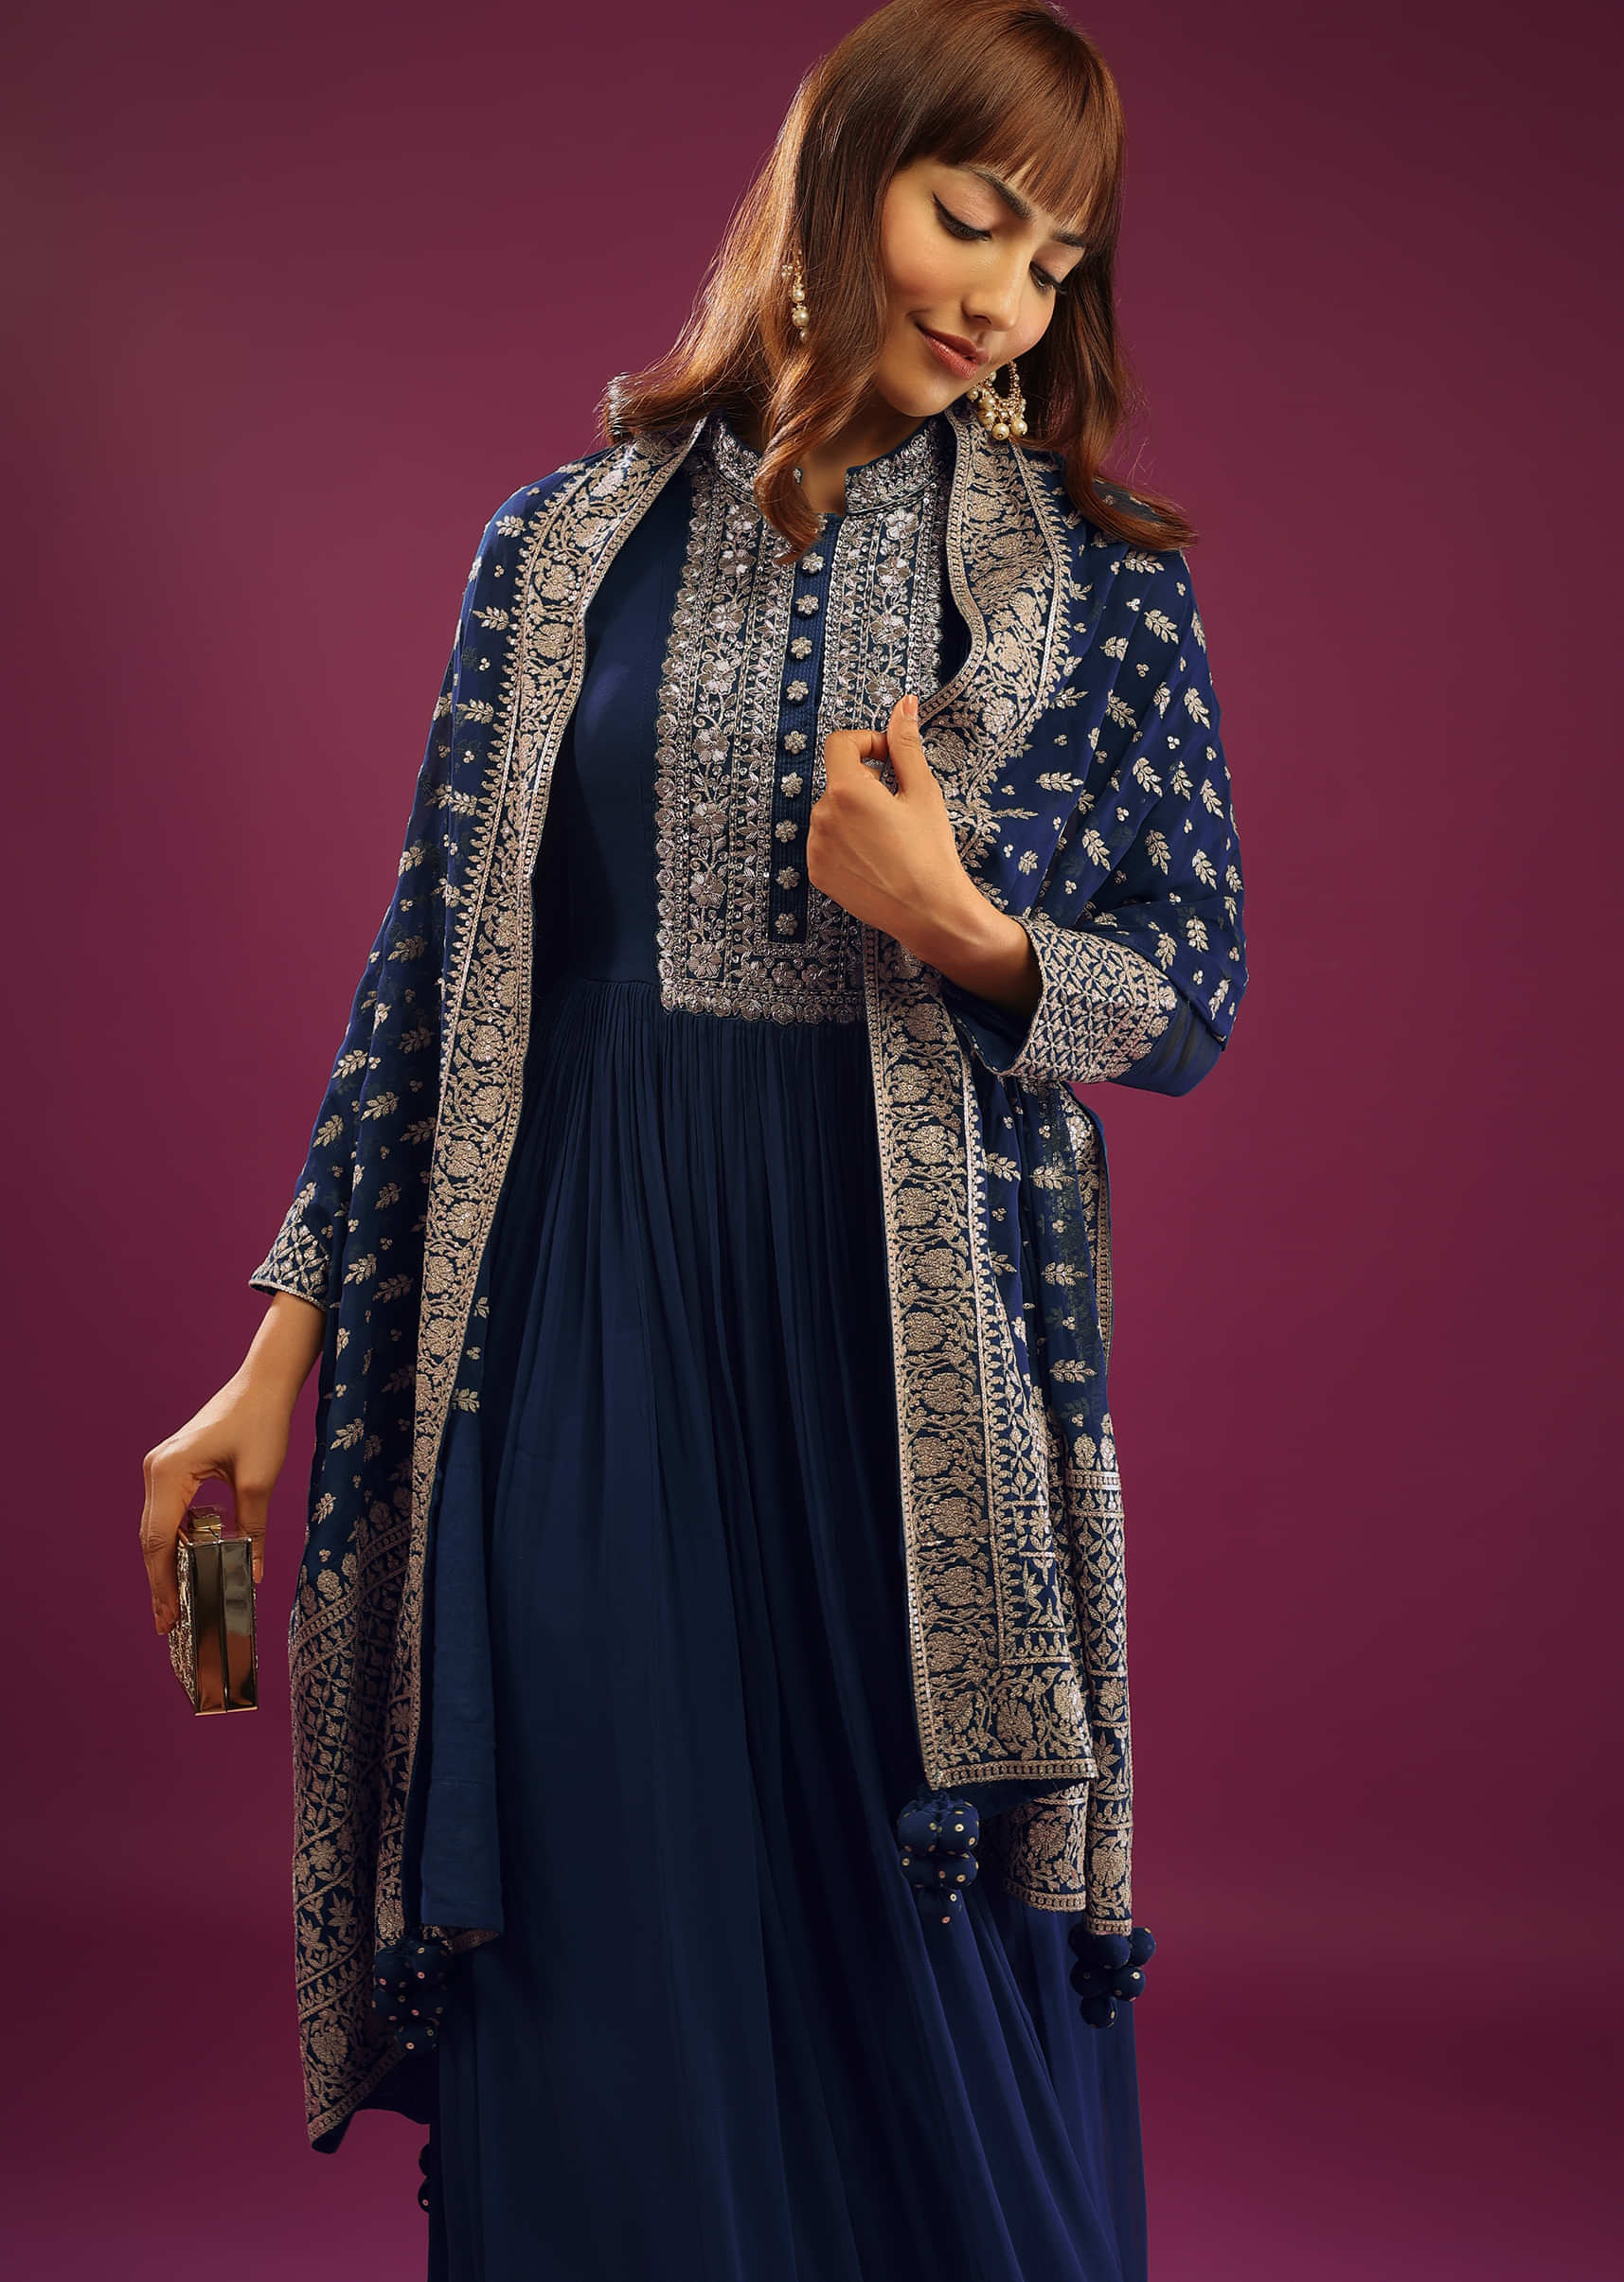 Midnight Blue Anarkali Suit In Georgette With Zardozi And Zari Embroidery